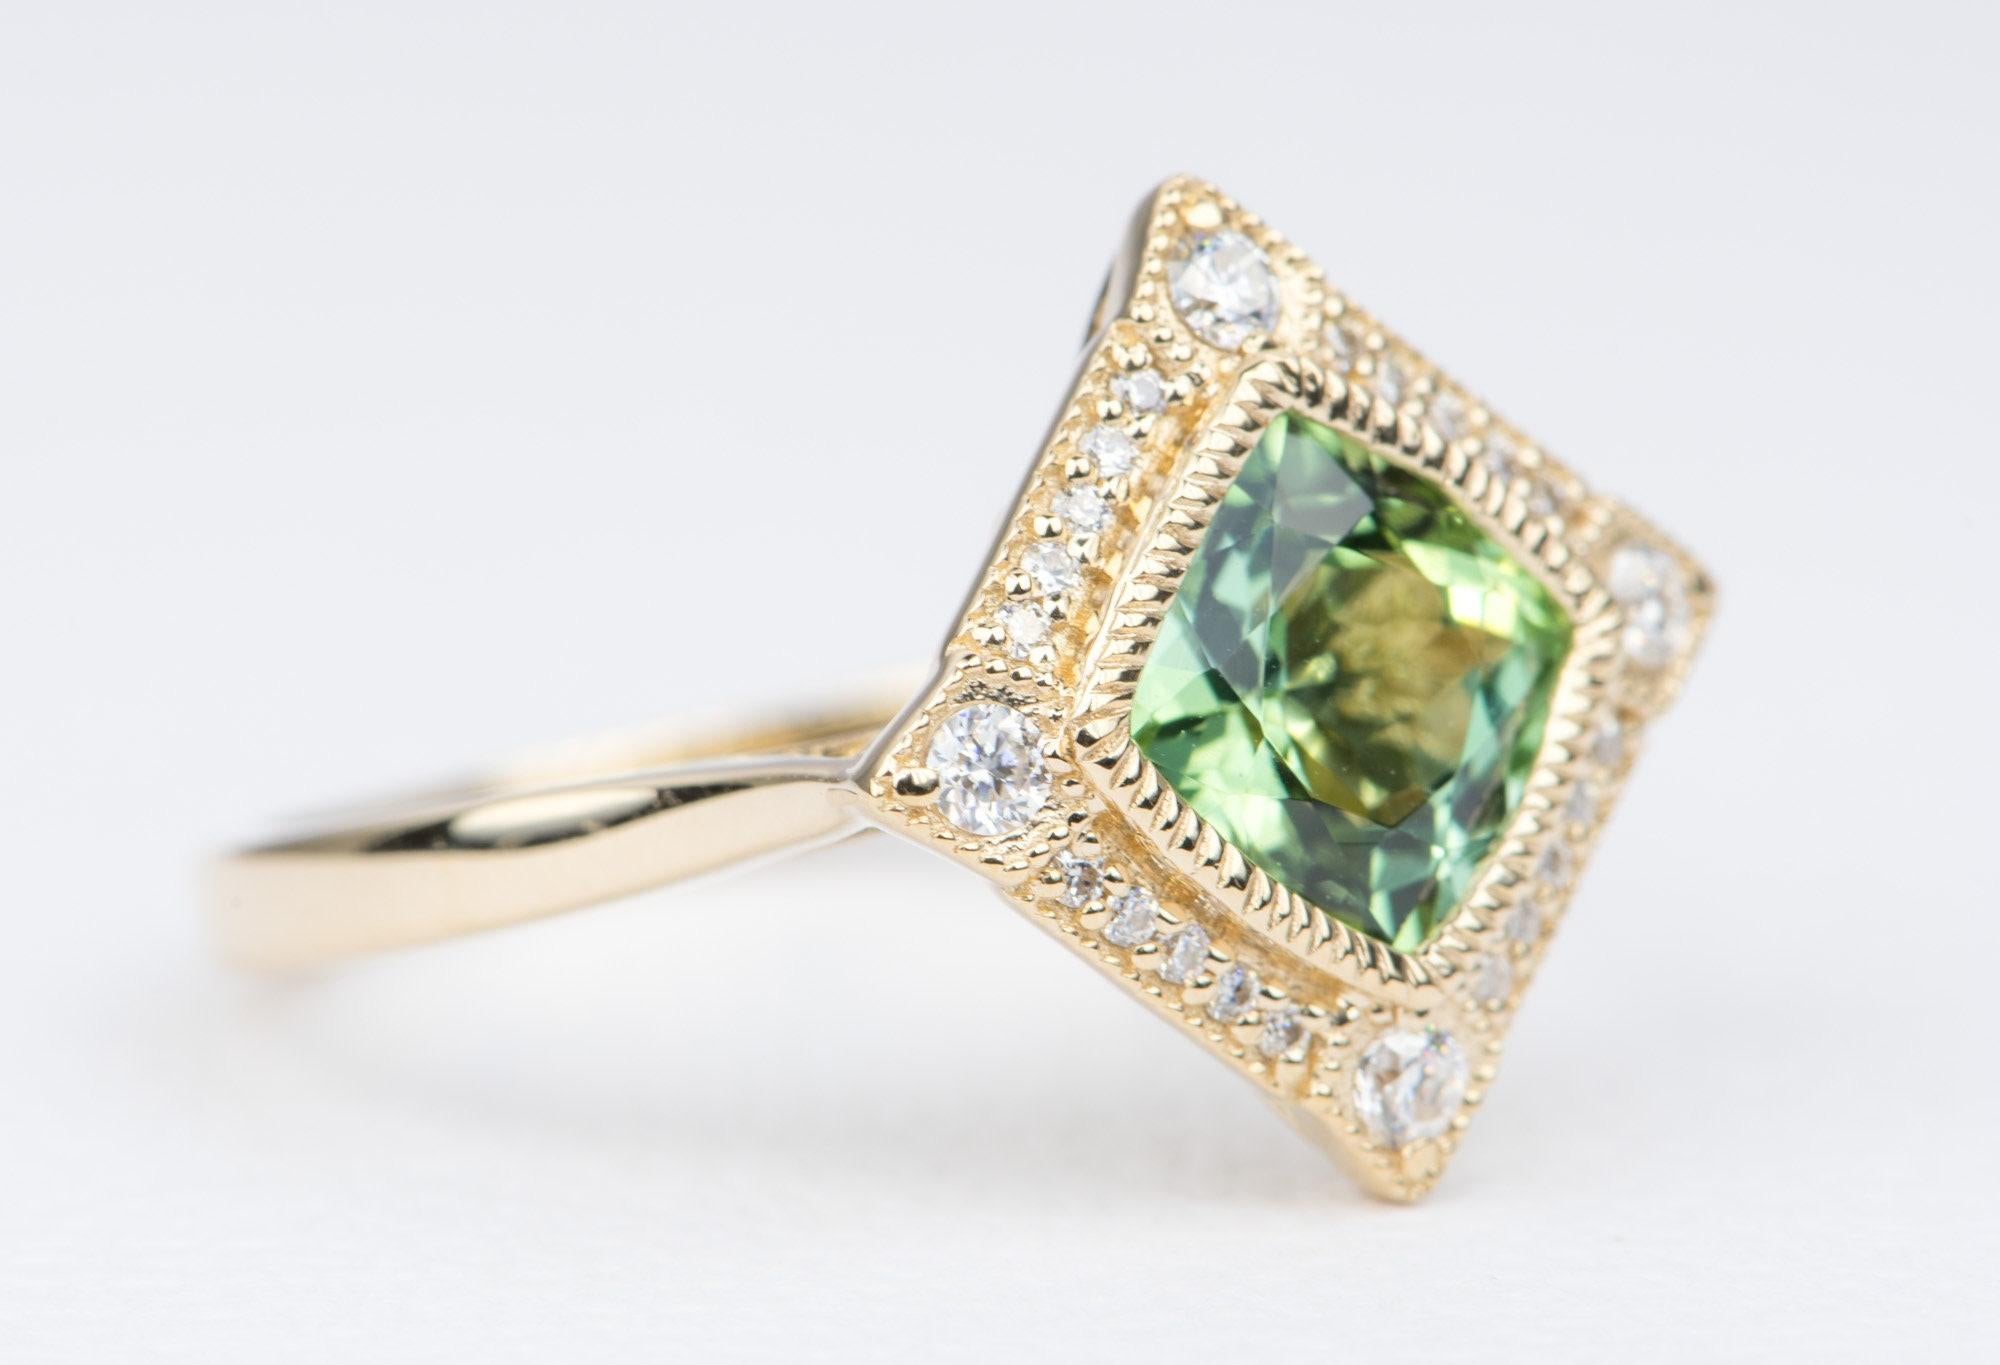 ♥ Solid 14K gold ring set with a beautiful green cushion cut tourmaline in the center and flanked by a halo of moissanite
♥ The center stone is bezel set with milgrain details. The halo also has an outer milgrain edge, for an overall